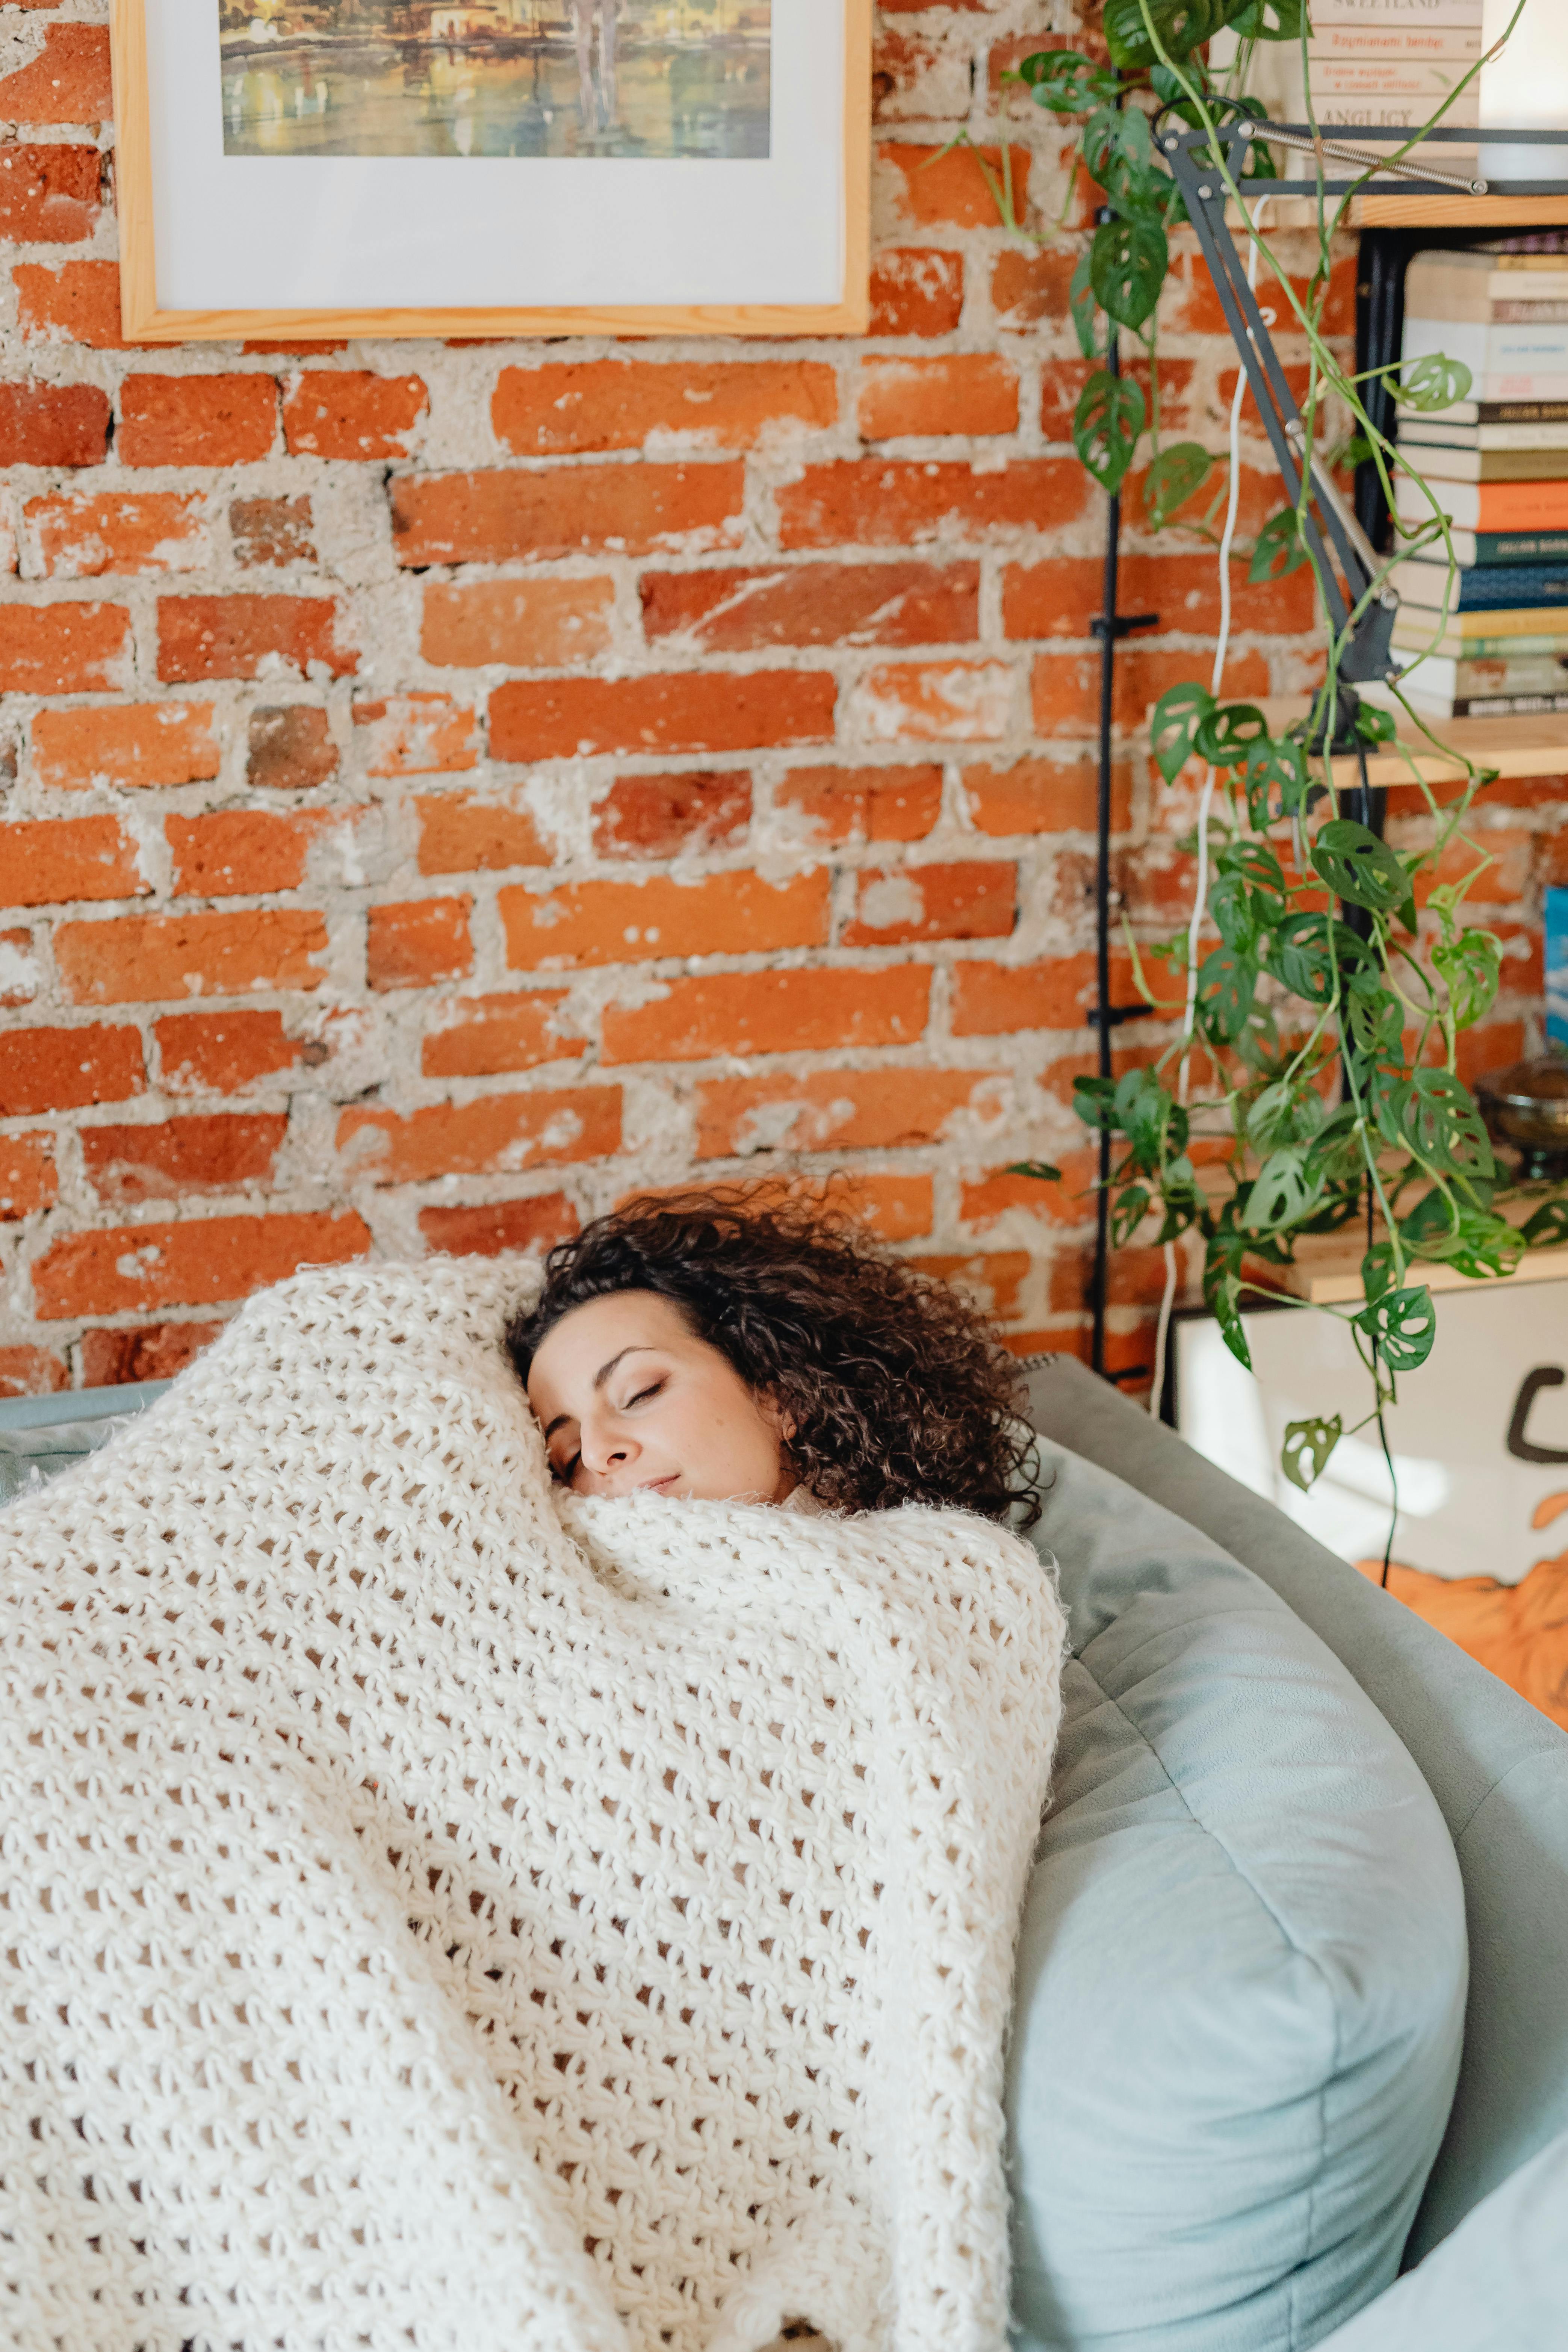 A woman covered in a light blanket while sleeping | Source: Pexels